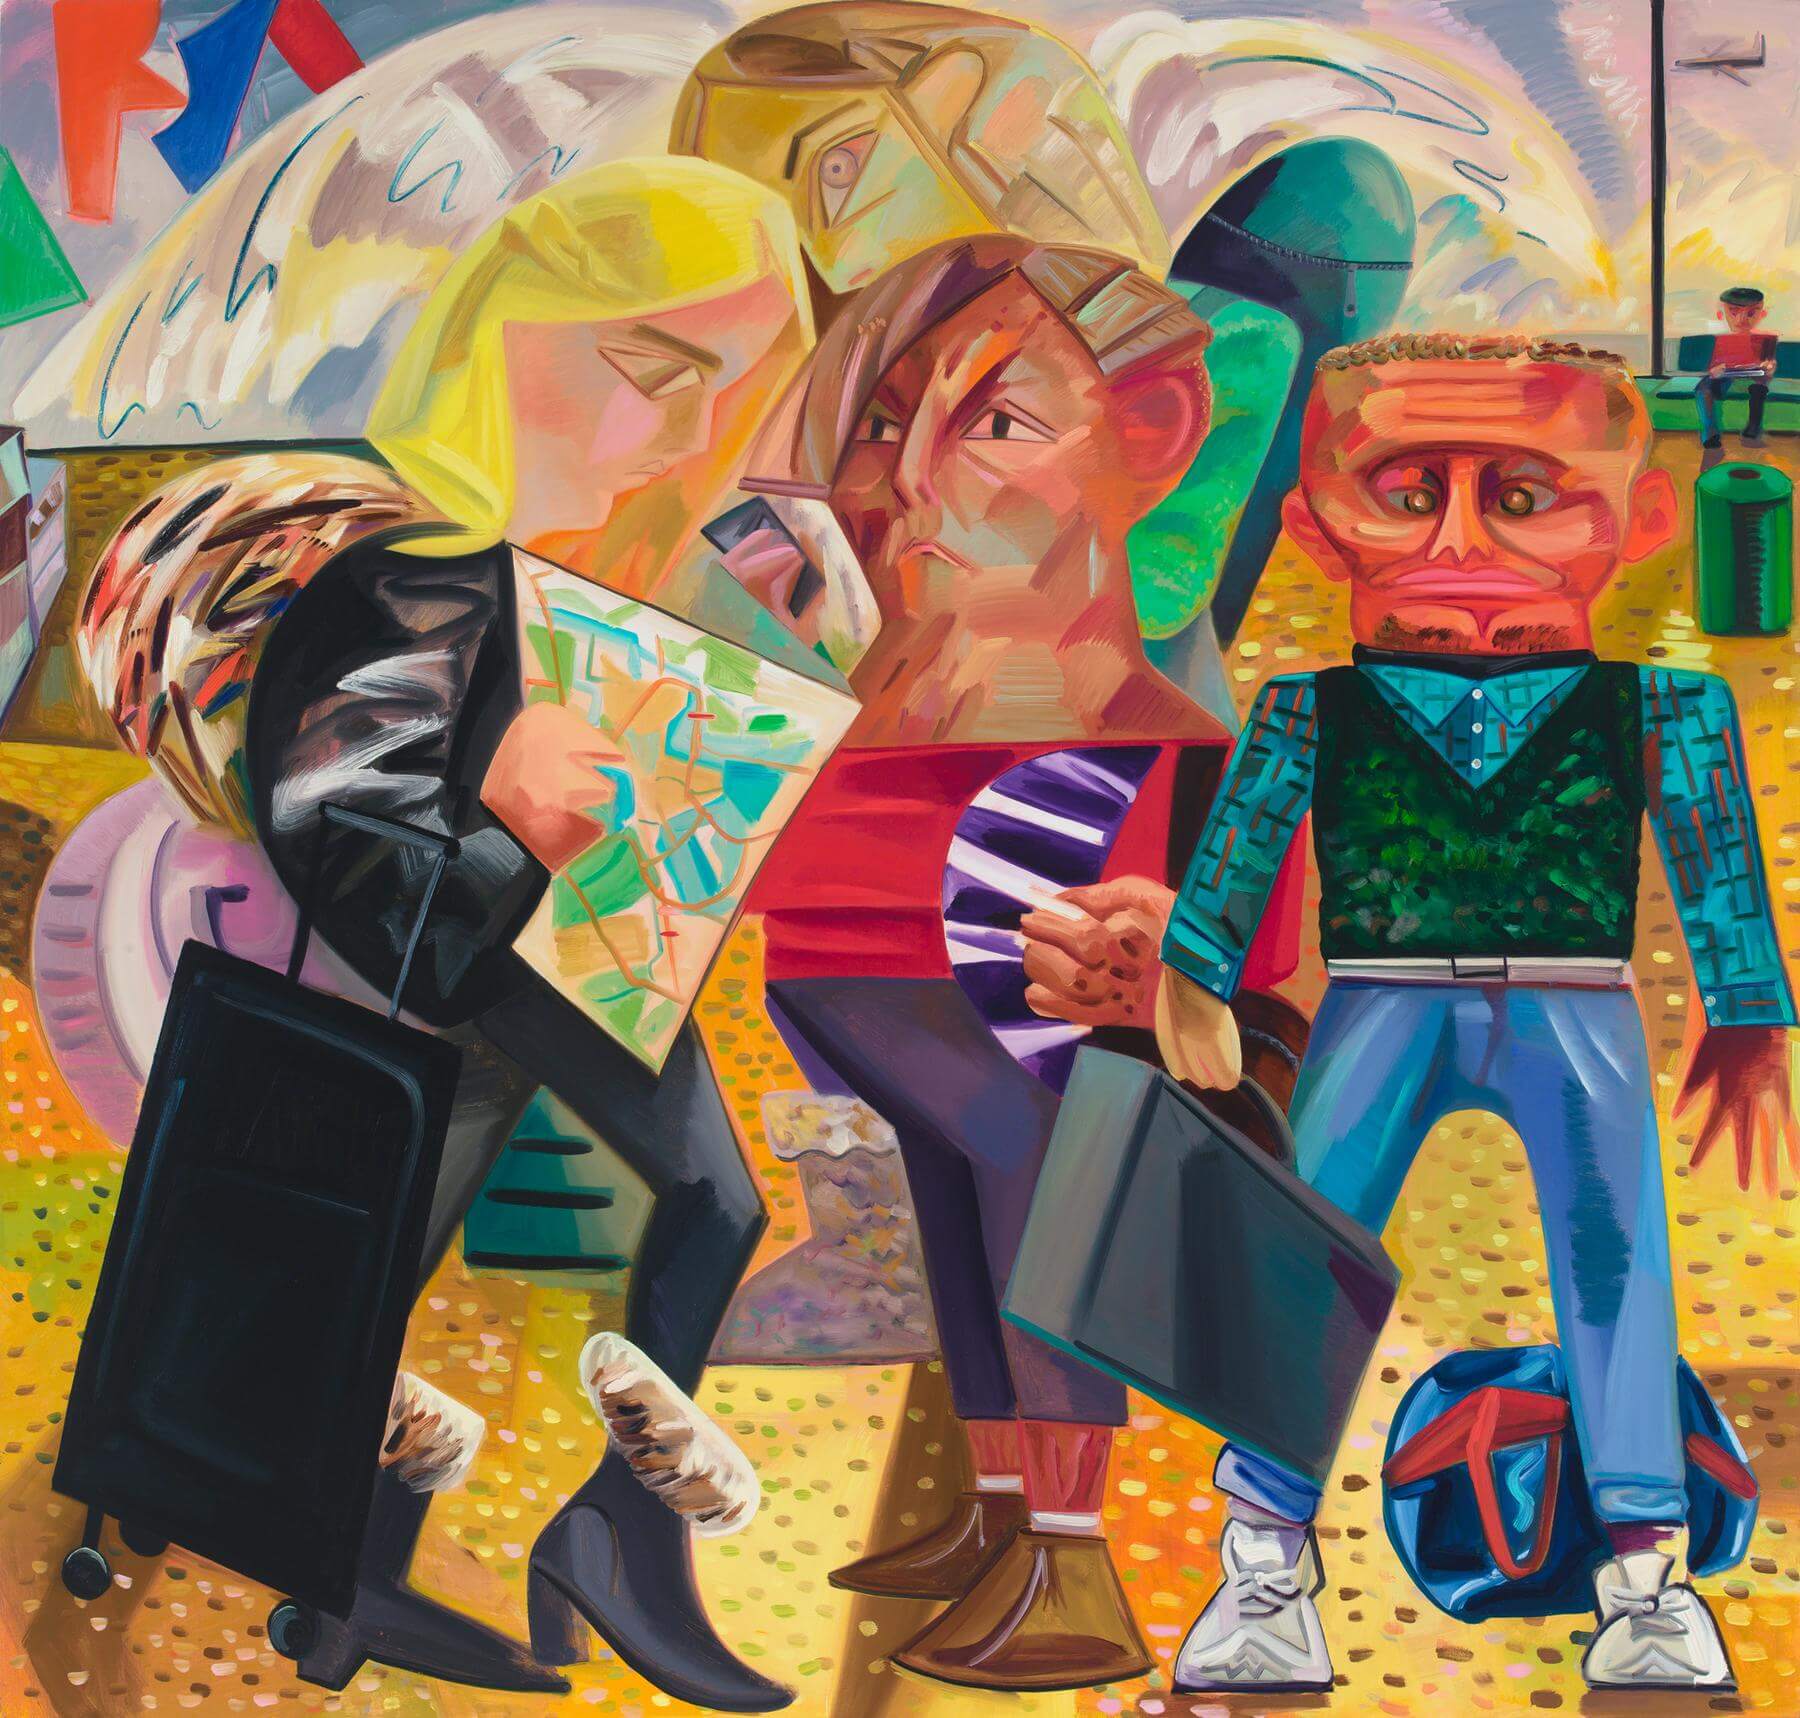 Dana Schutz, Swiss Family Traveling, 2015, oil on canvas, 84 x 88 inches (courtesy of the artist and Petzel, New York)